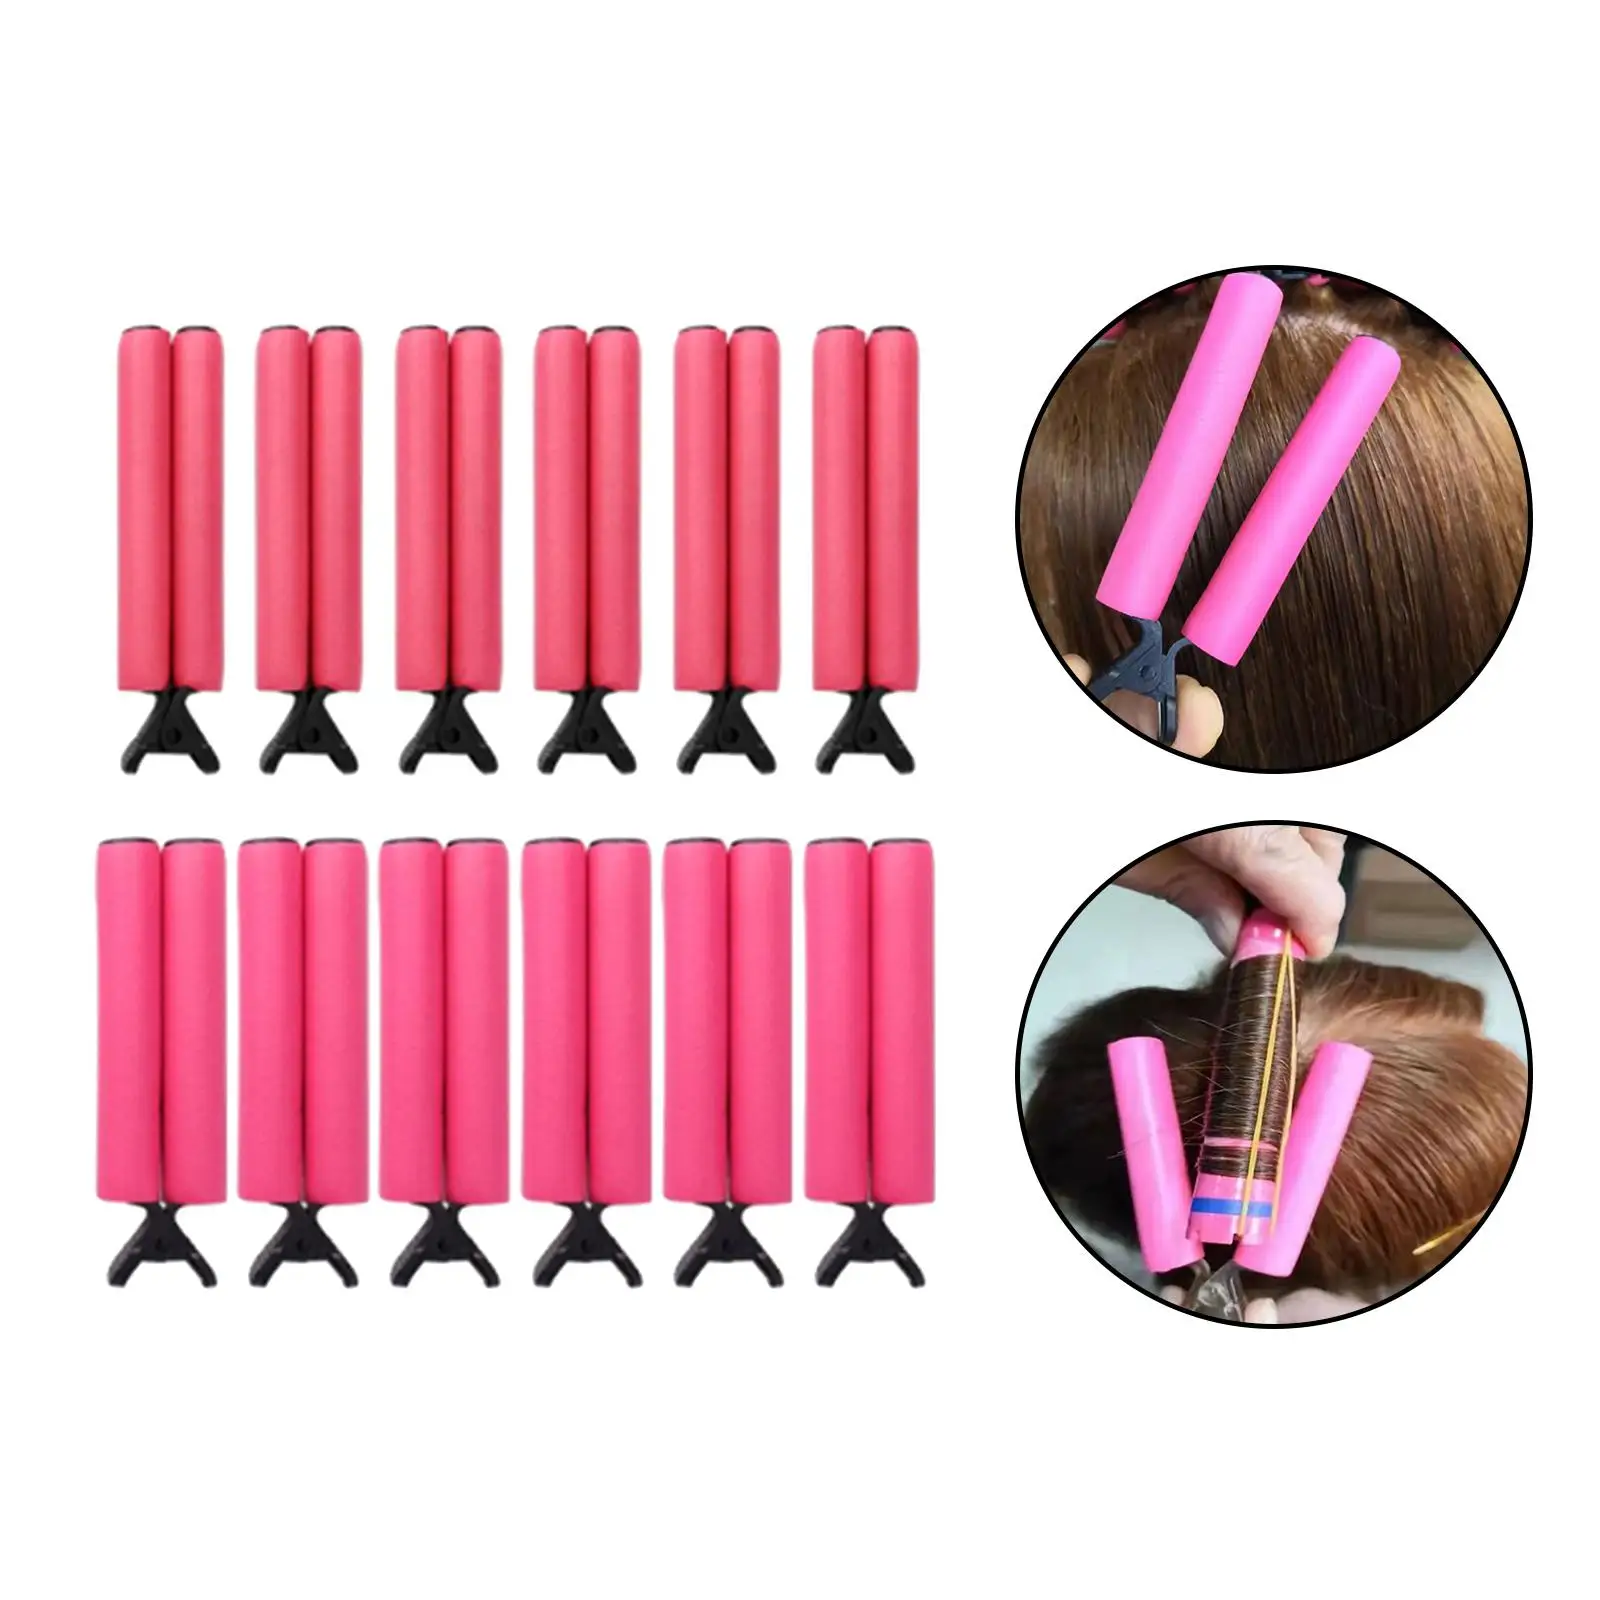 12 Insulation Clip, Hairdressing Tool Without Trace Perm Fixing Sponge Clips, for Barber Salon Easy to